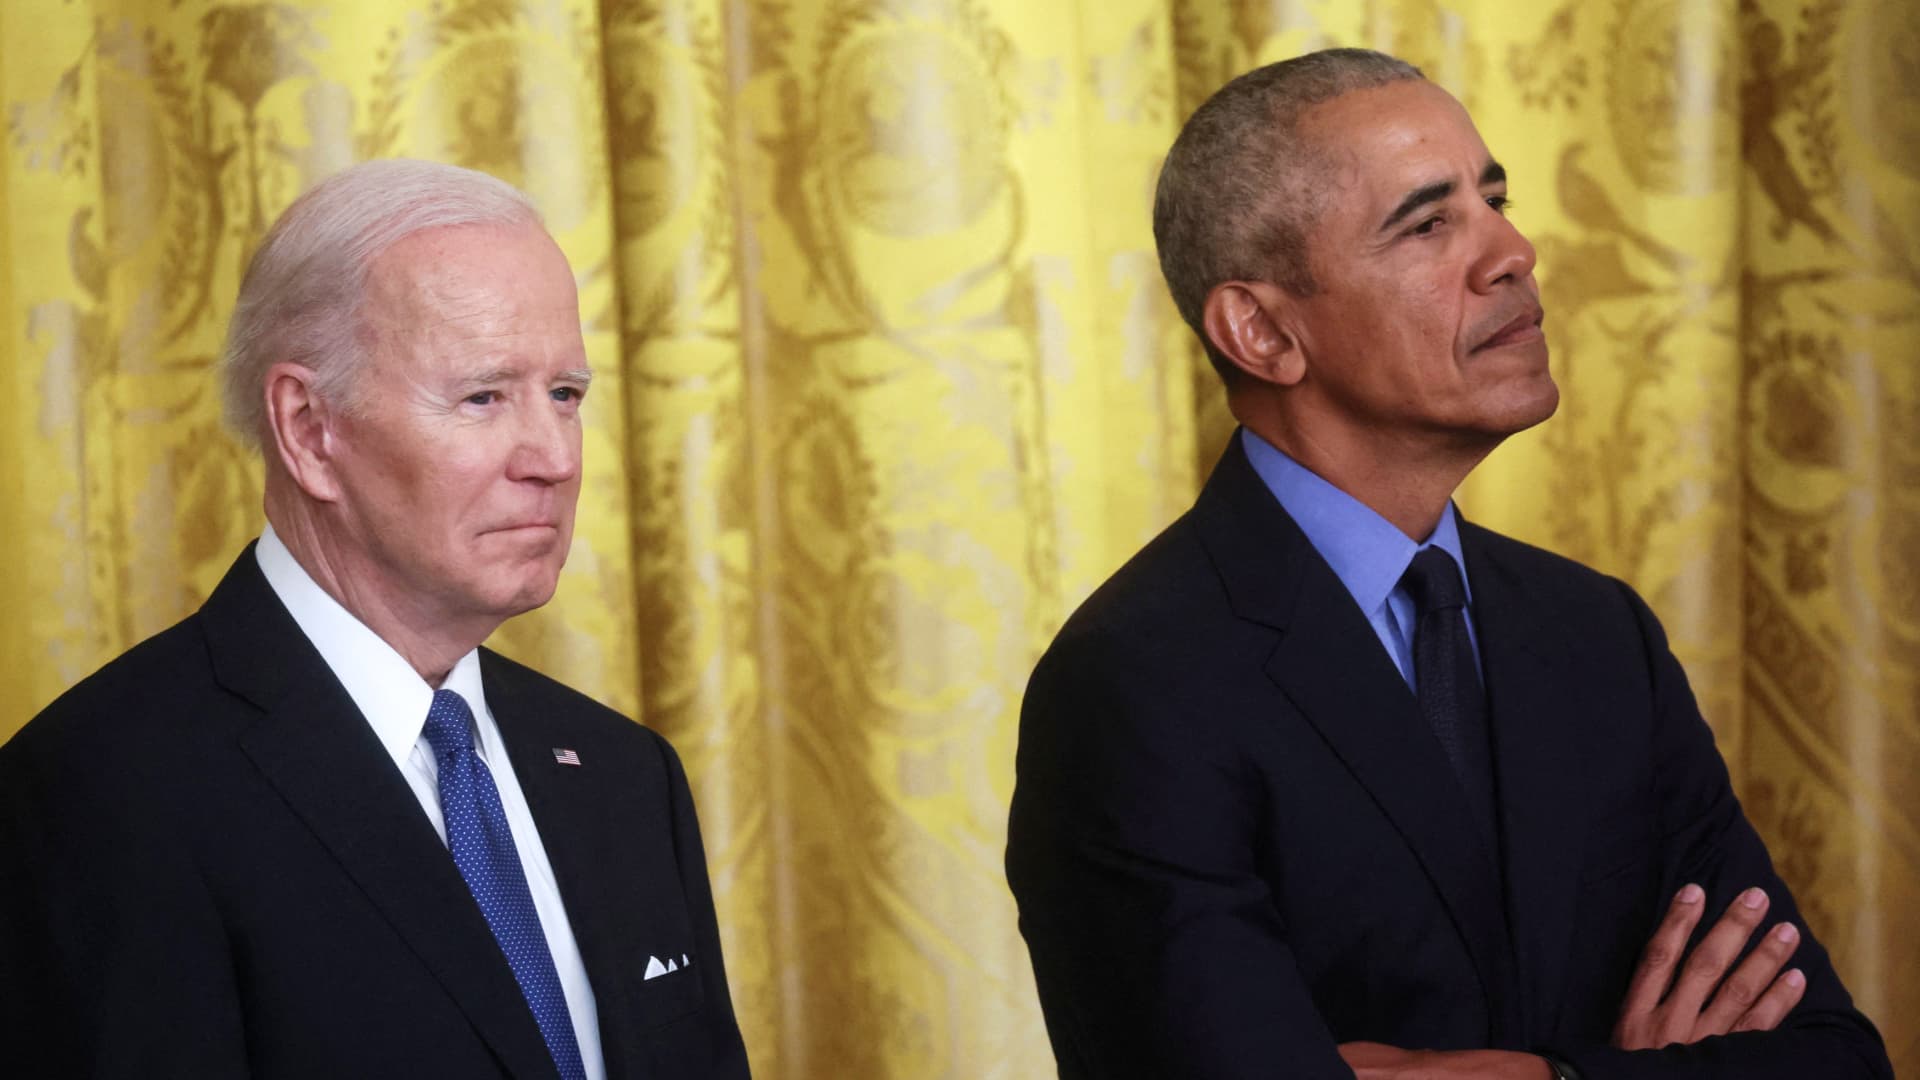 Obama boasted about opposing federal gas tax holiday before 2008 election — Biden now wants one